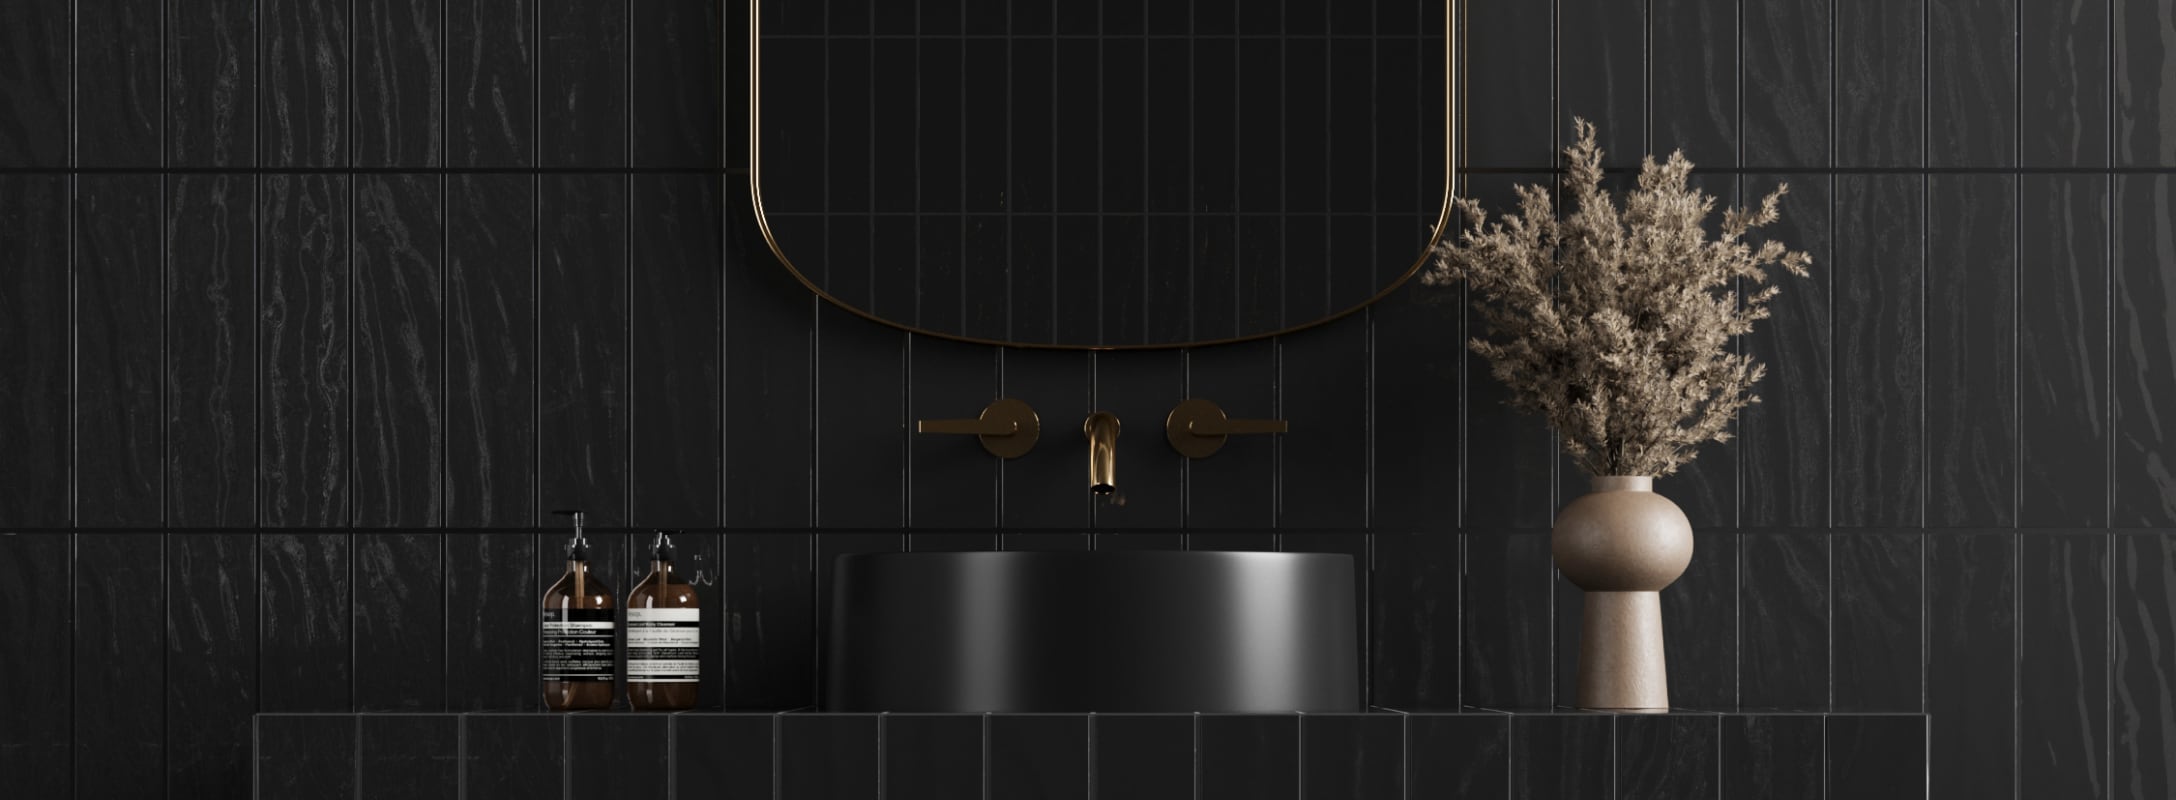 Luxury Black Subway Tile walls in a contemporary bathroom, adding a sophisticated and elegant touch.